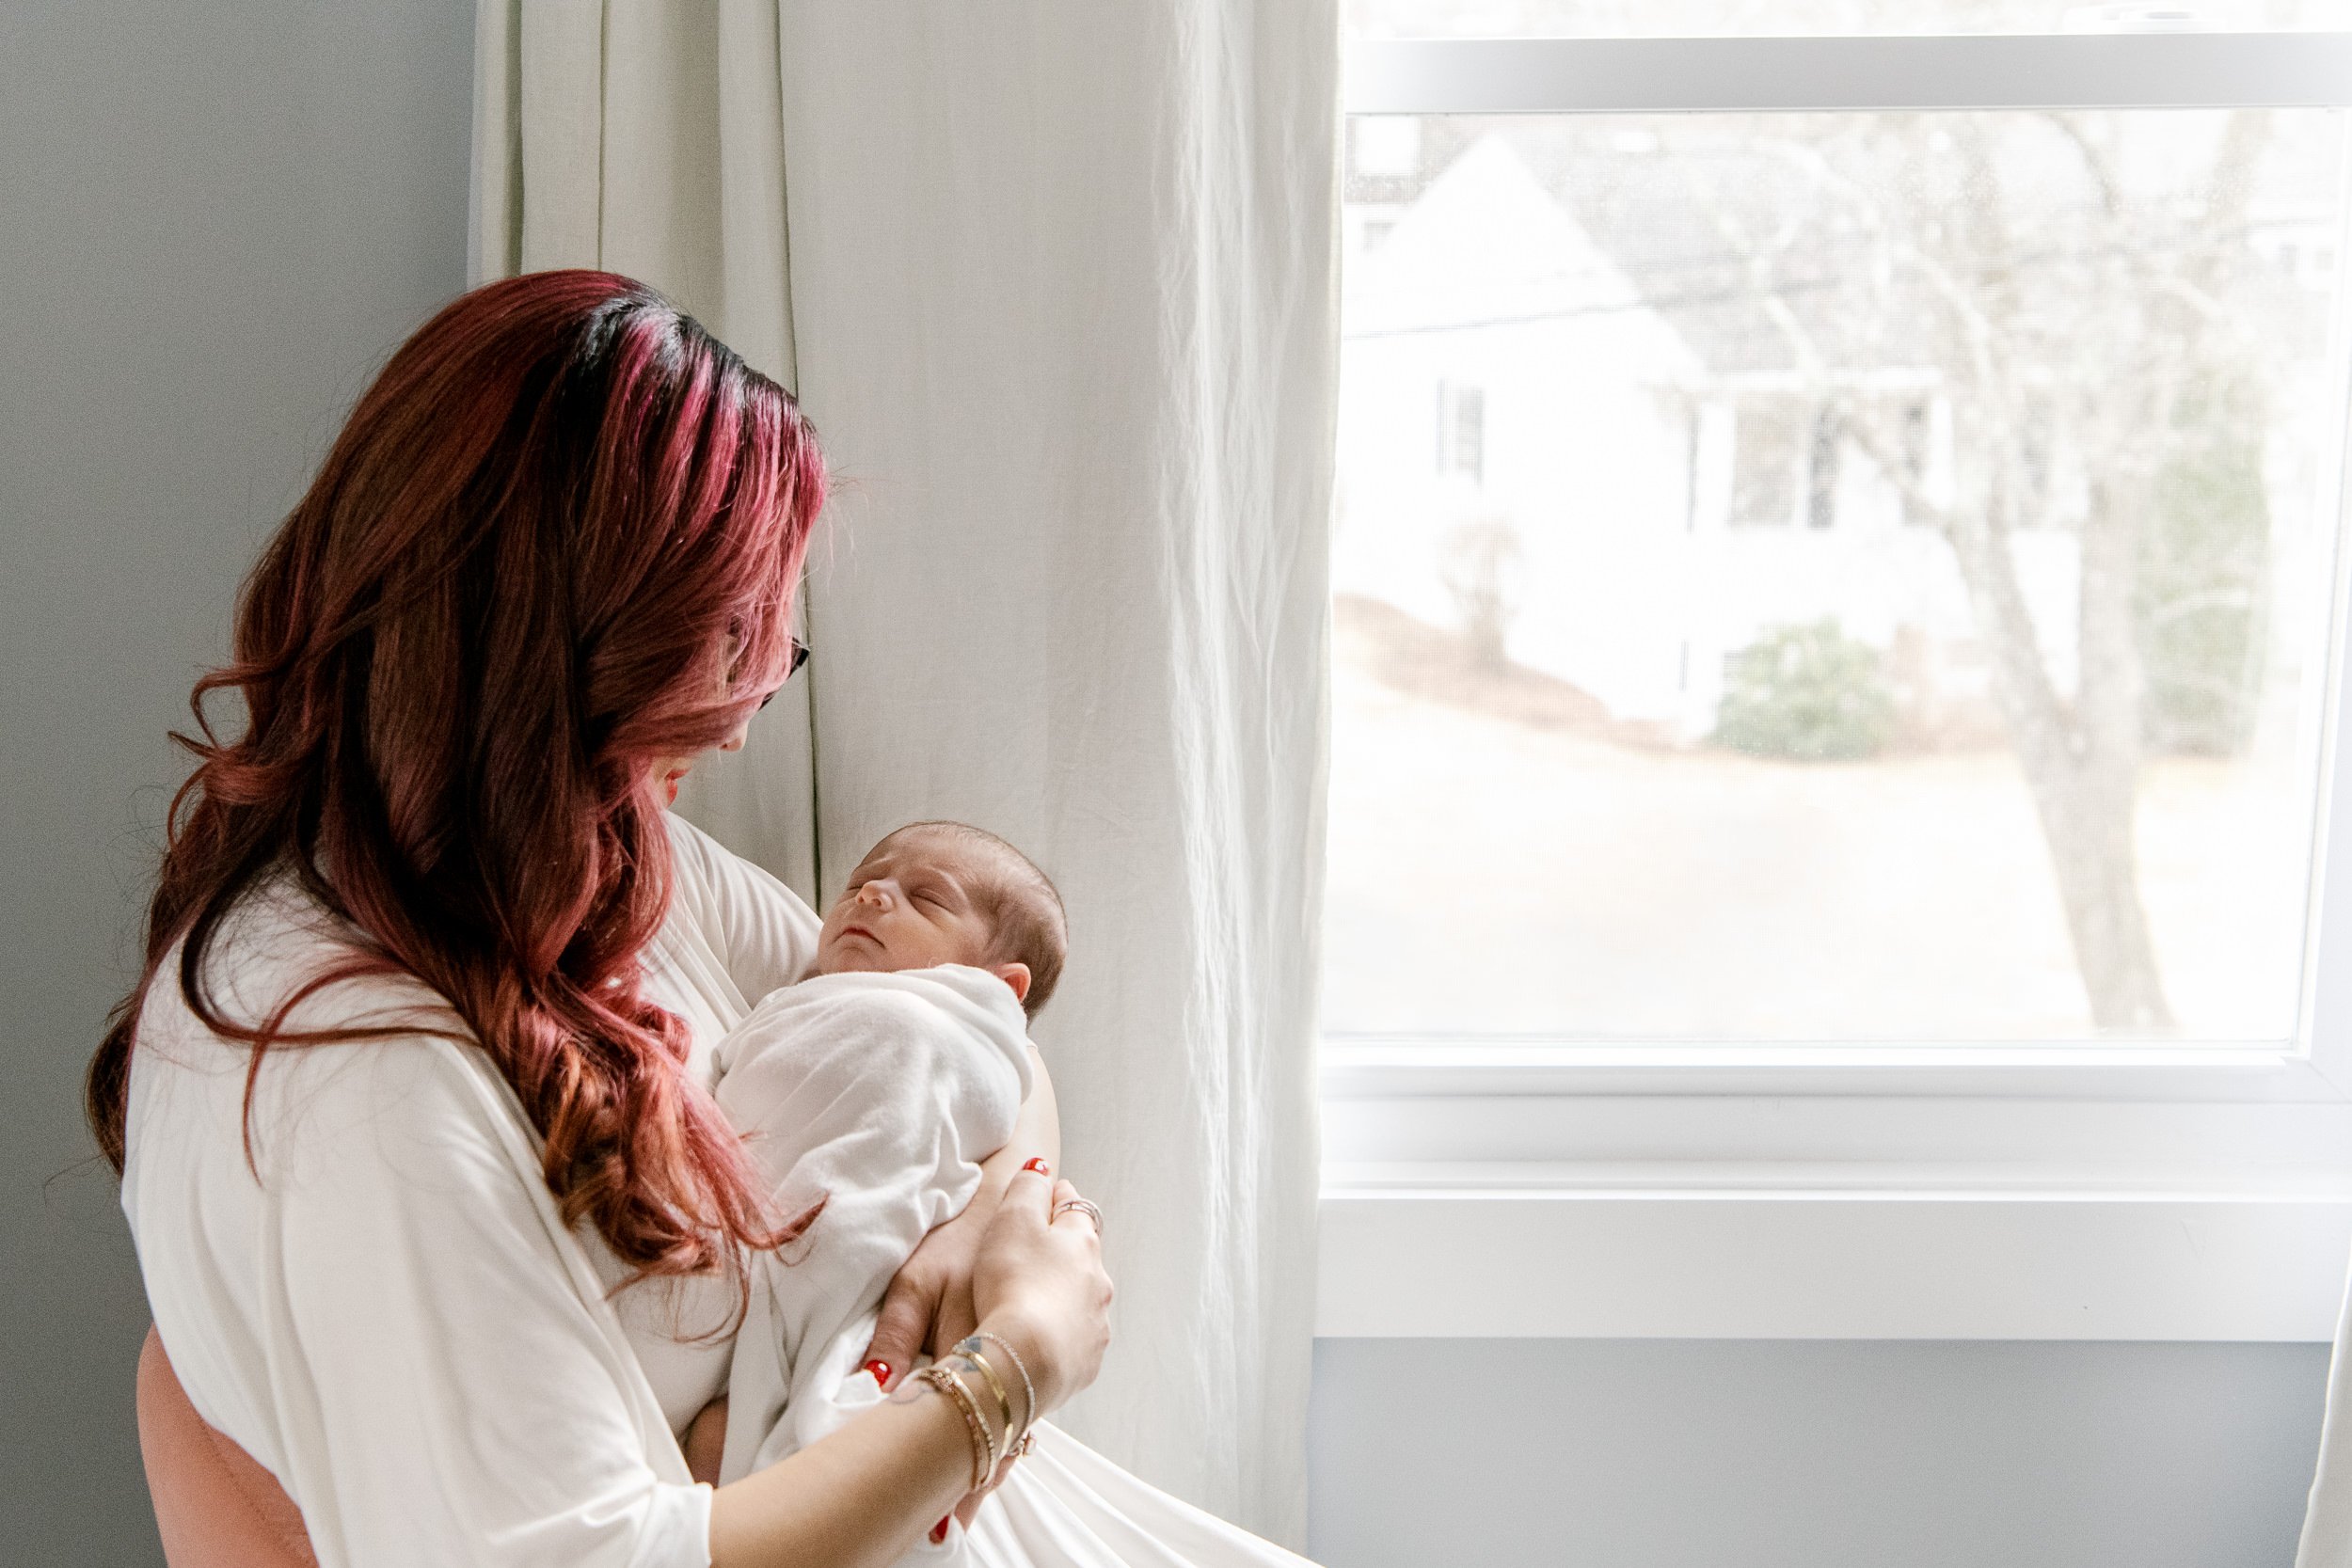  Newborn Photographer Nicole Hawkins Photography captures an in-home photo of mother and baby. professional newborn photography #NicoleHawkinsPhotography #NicoleHawkinsFamily #Newborns #InHomeNewborns #NicoleHawkinsNewborns #NJnewborns #babygirl 